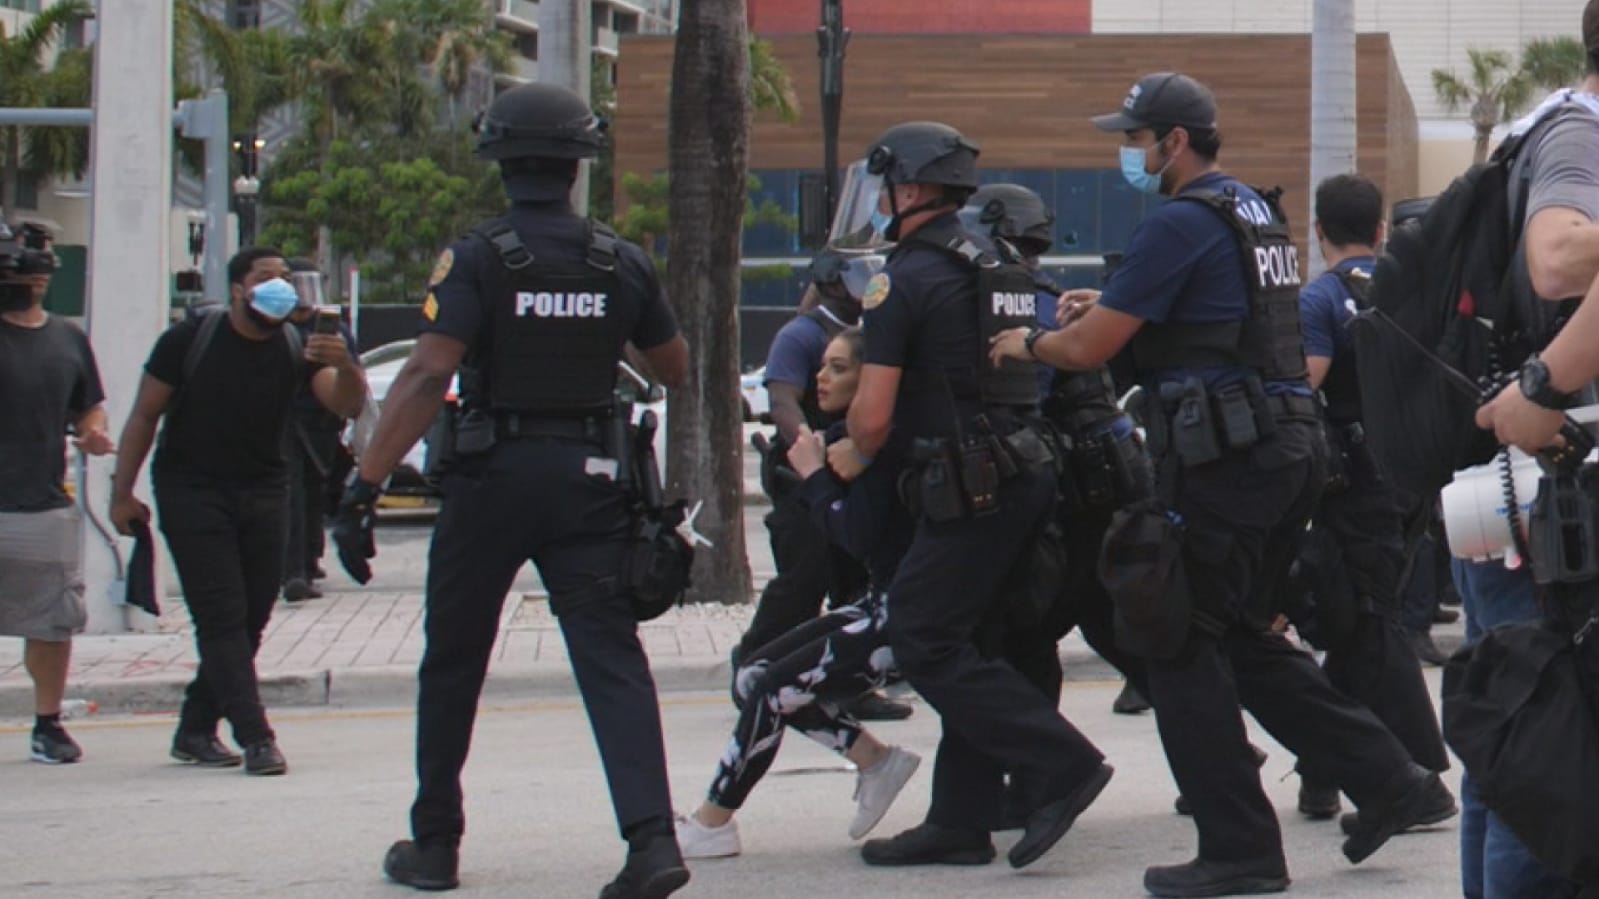 Alaa Massri, 18, being arrested during a protest in Miami on 10 June (CAIR-Florida) 